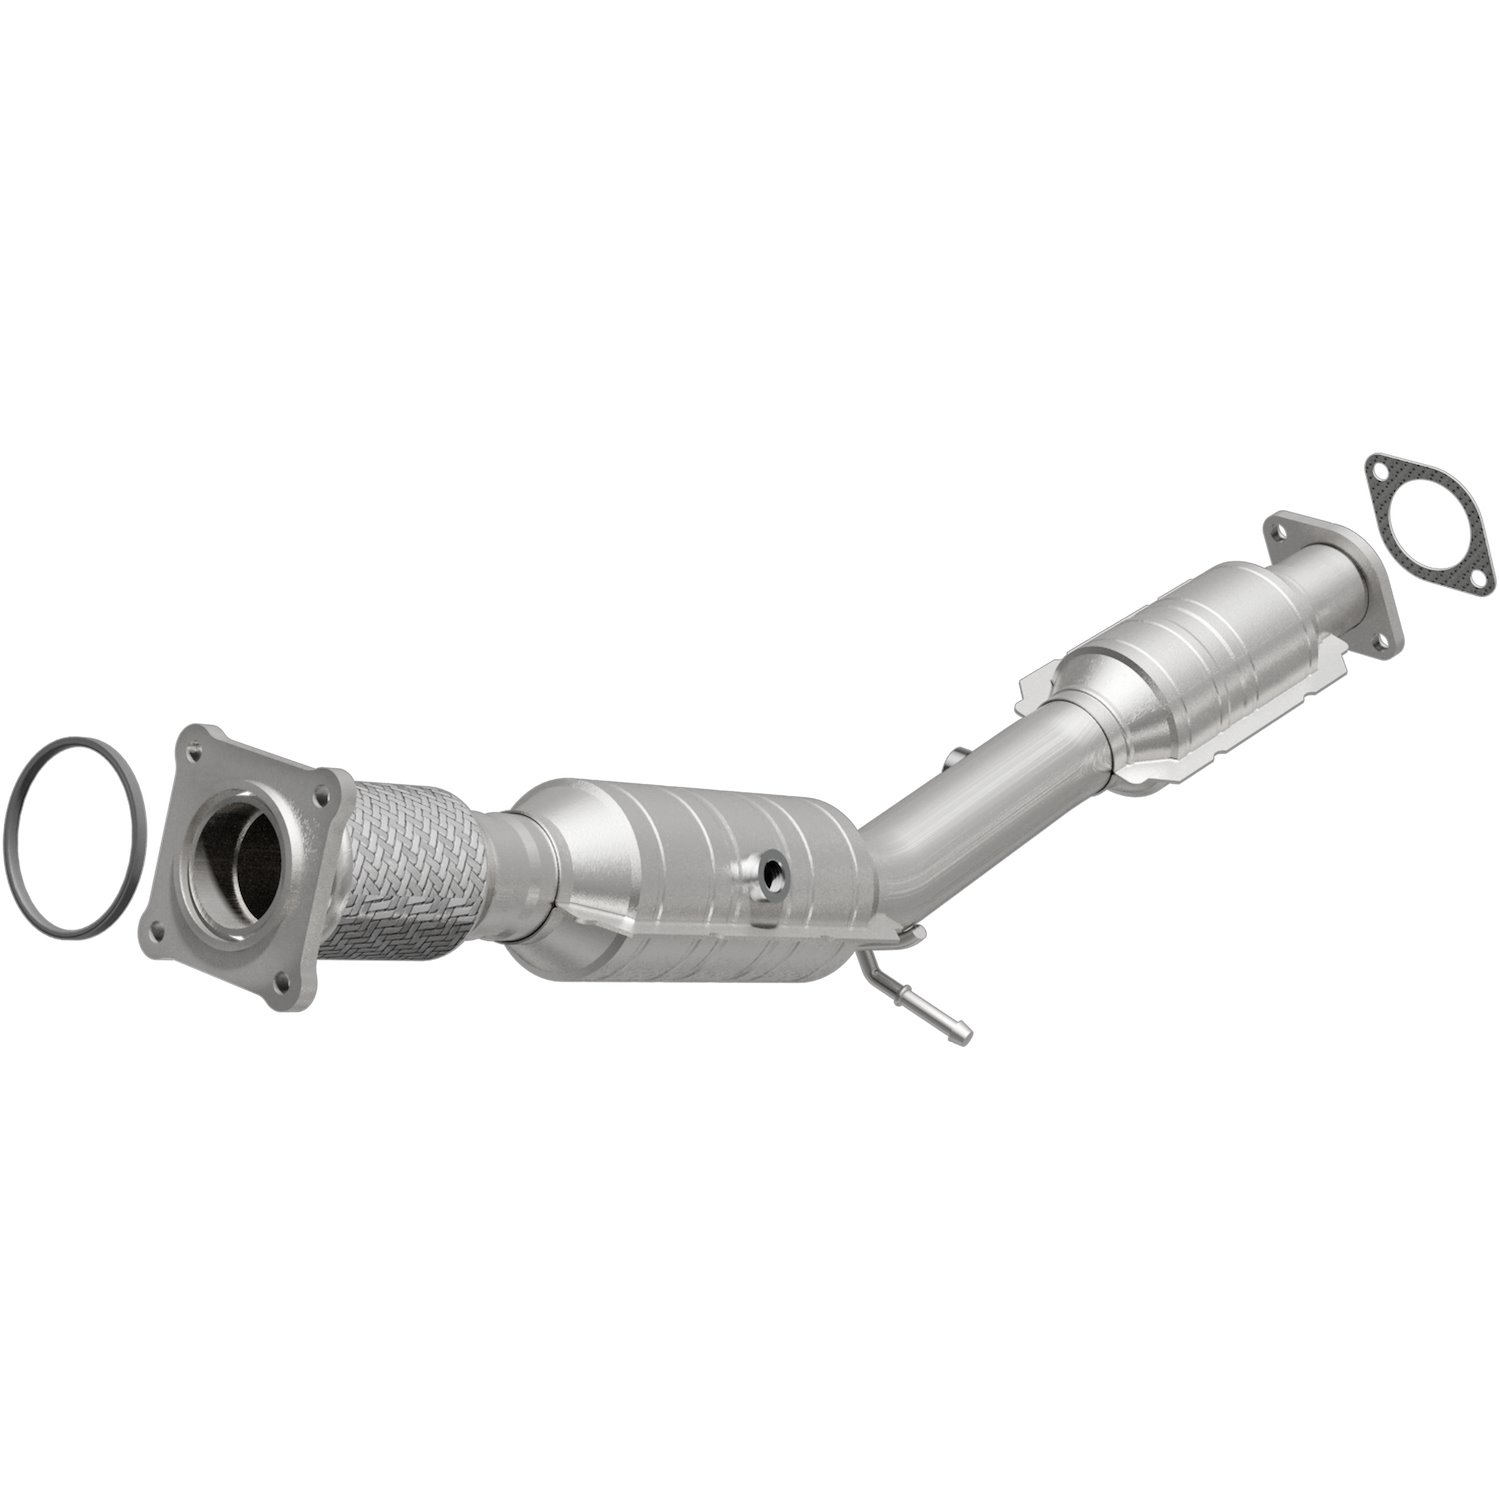 OEM Grade Federal / EPA Compliant Direct-Fit Catalytic Converter 51824